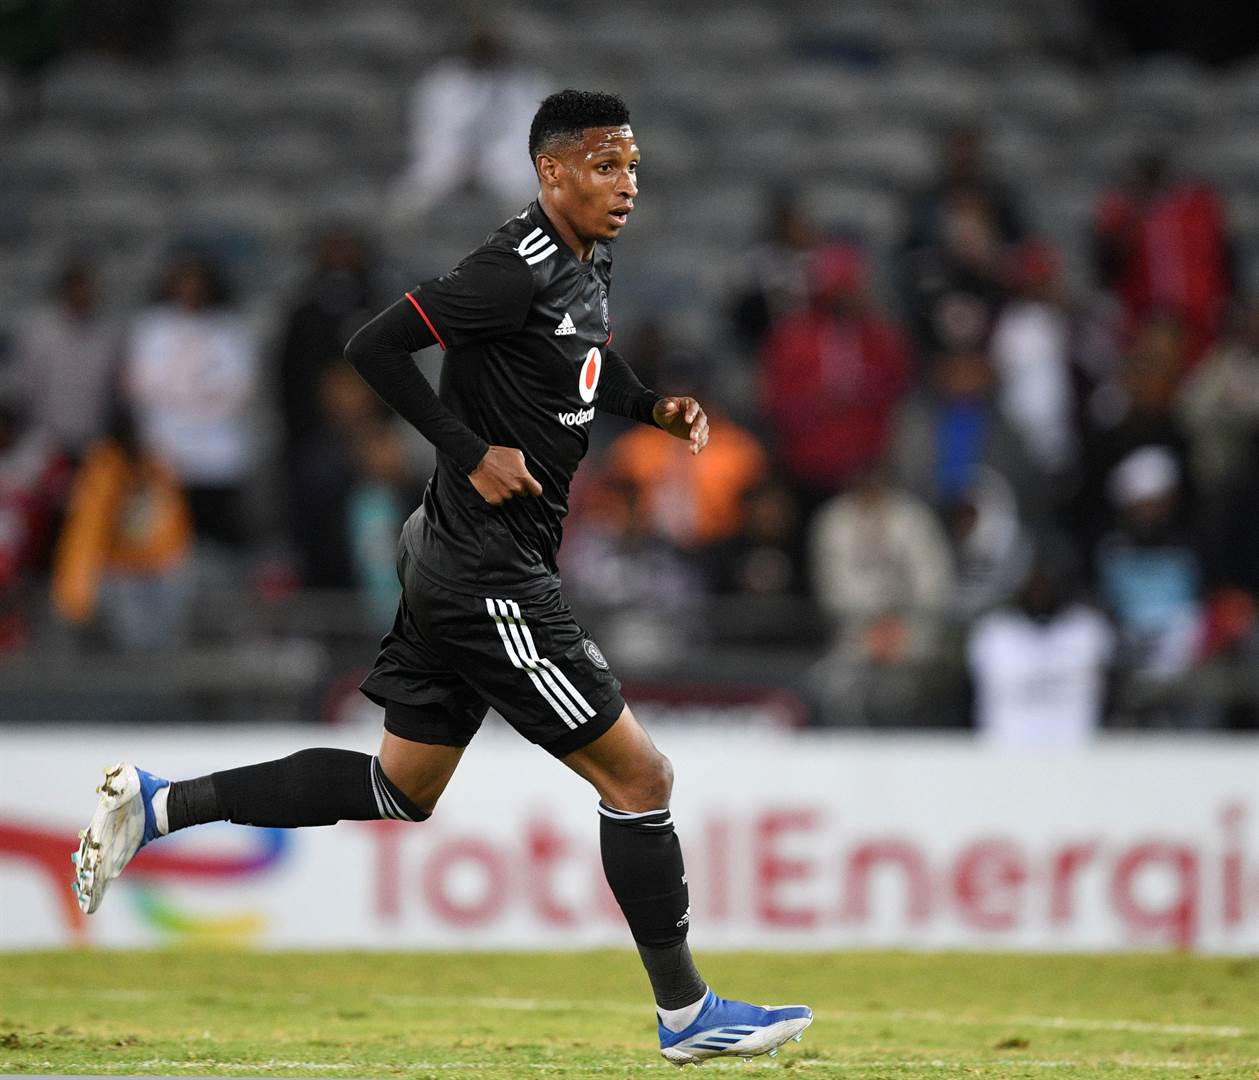 Orlando Pirates signings 'are not the right players for the team' - Modabi